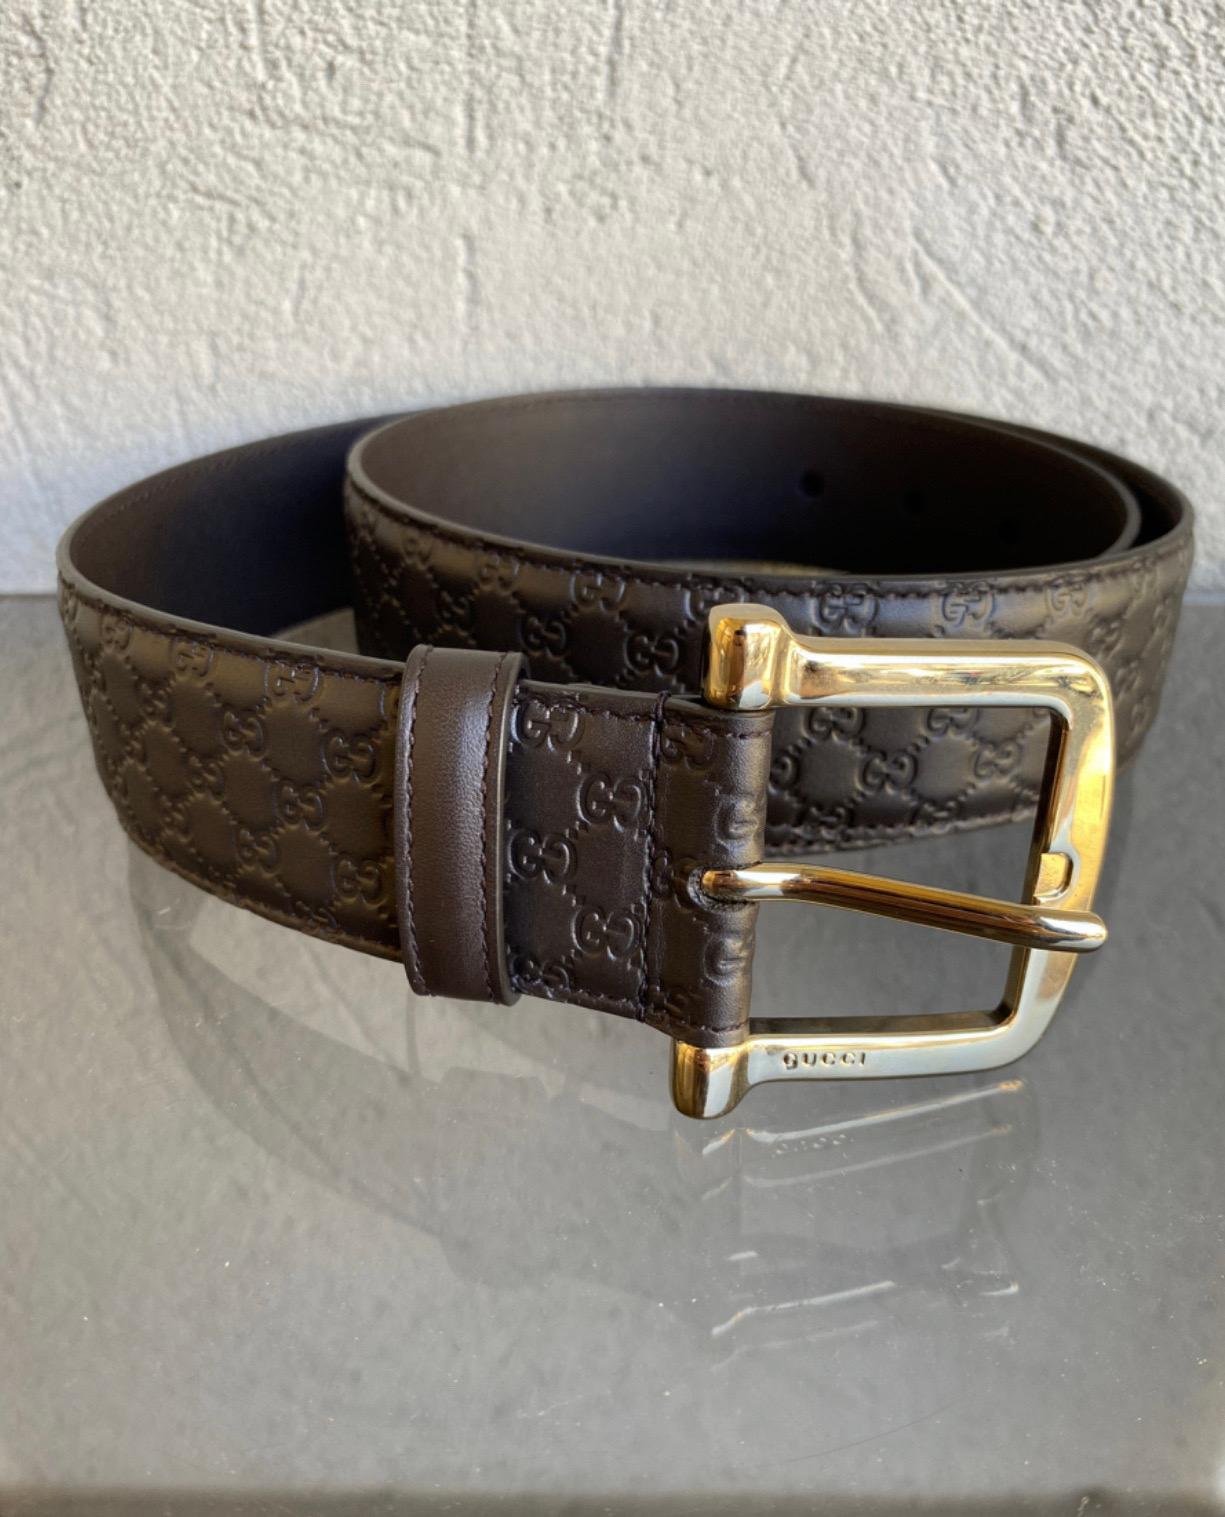 Gucci belt monogram Guccissima, dark brown leather, with gold-colored steel parts, measures 85cm, has a height of 4cm, new, never used with dustbag.